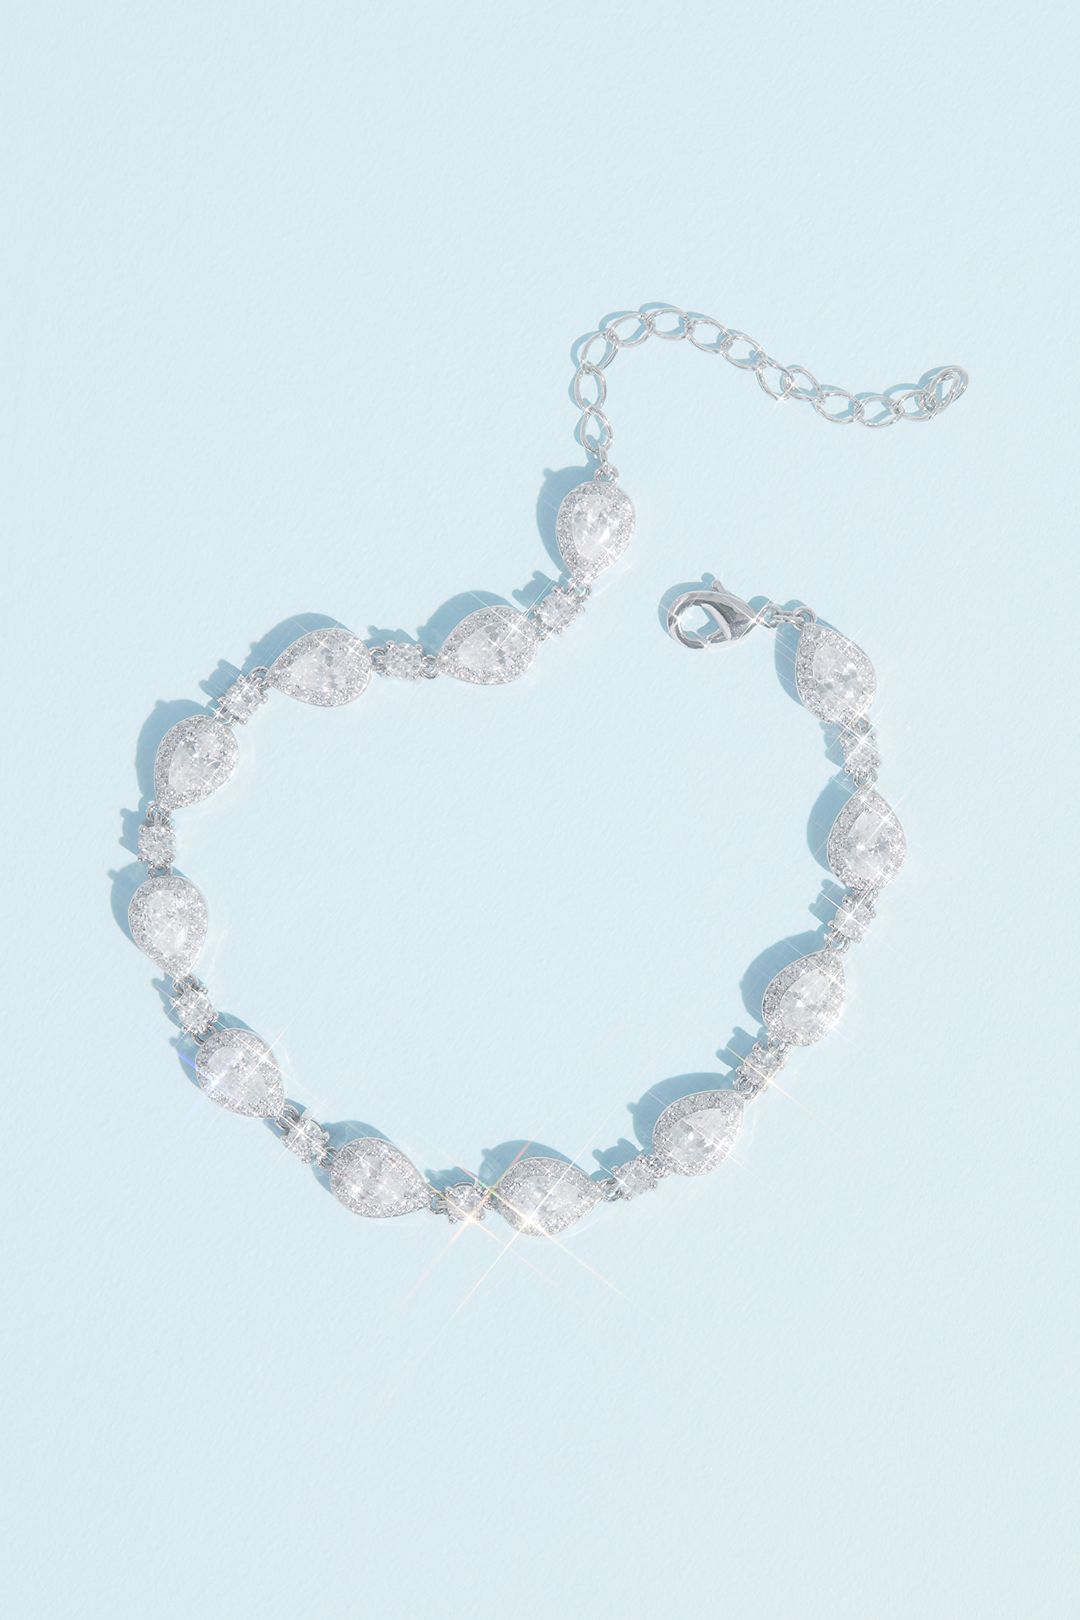 Haloed Teardrop and Solitaire Crystal Bracelet Image 1